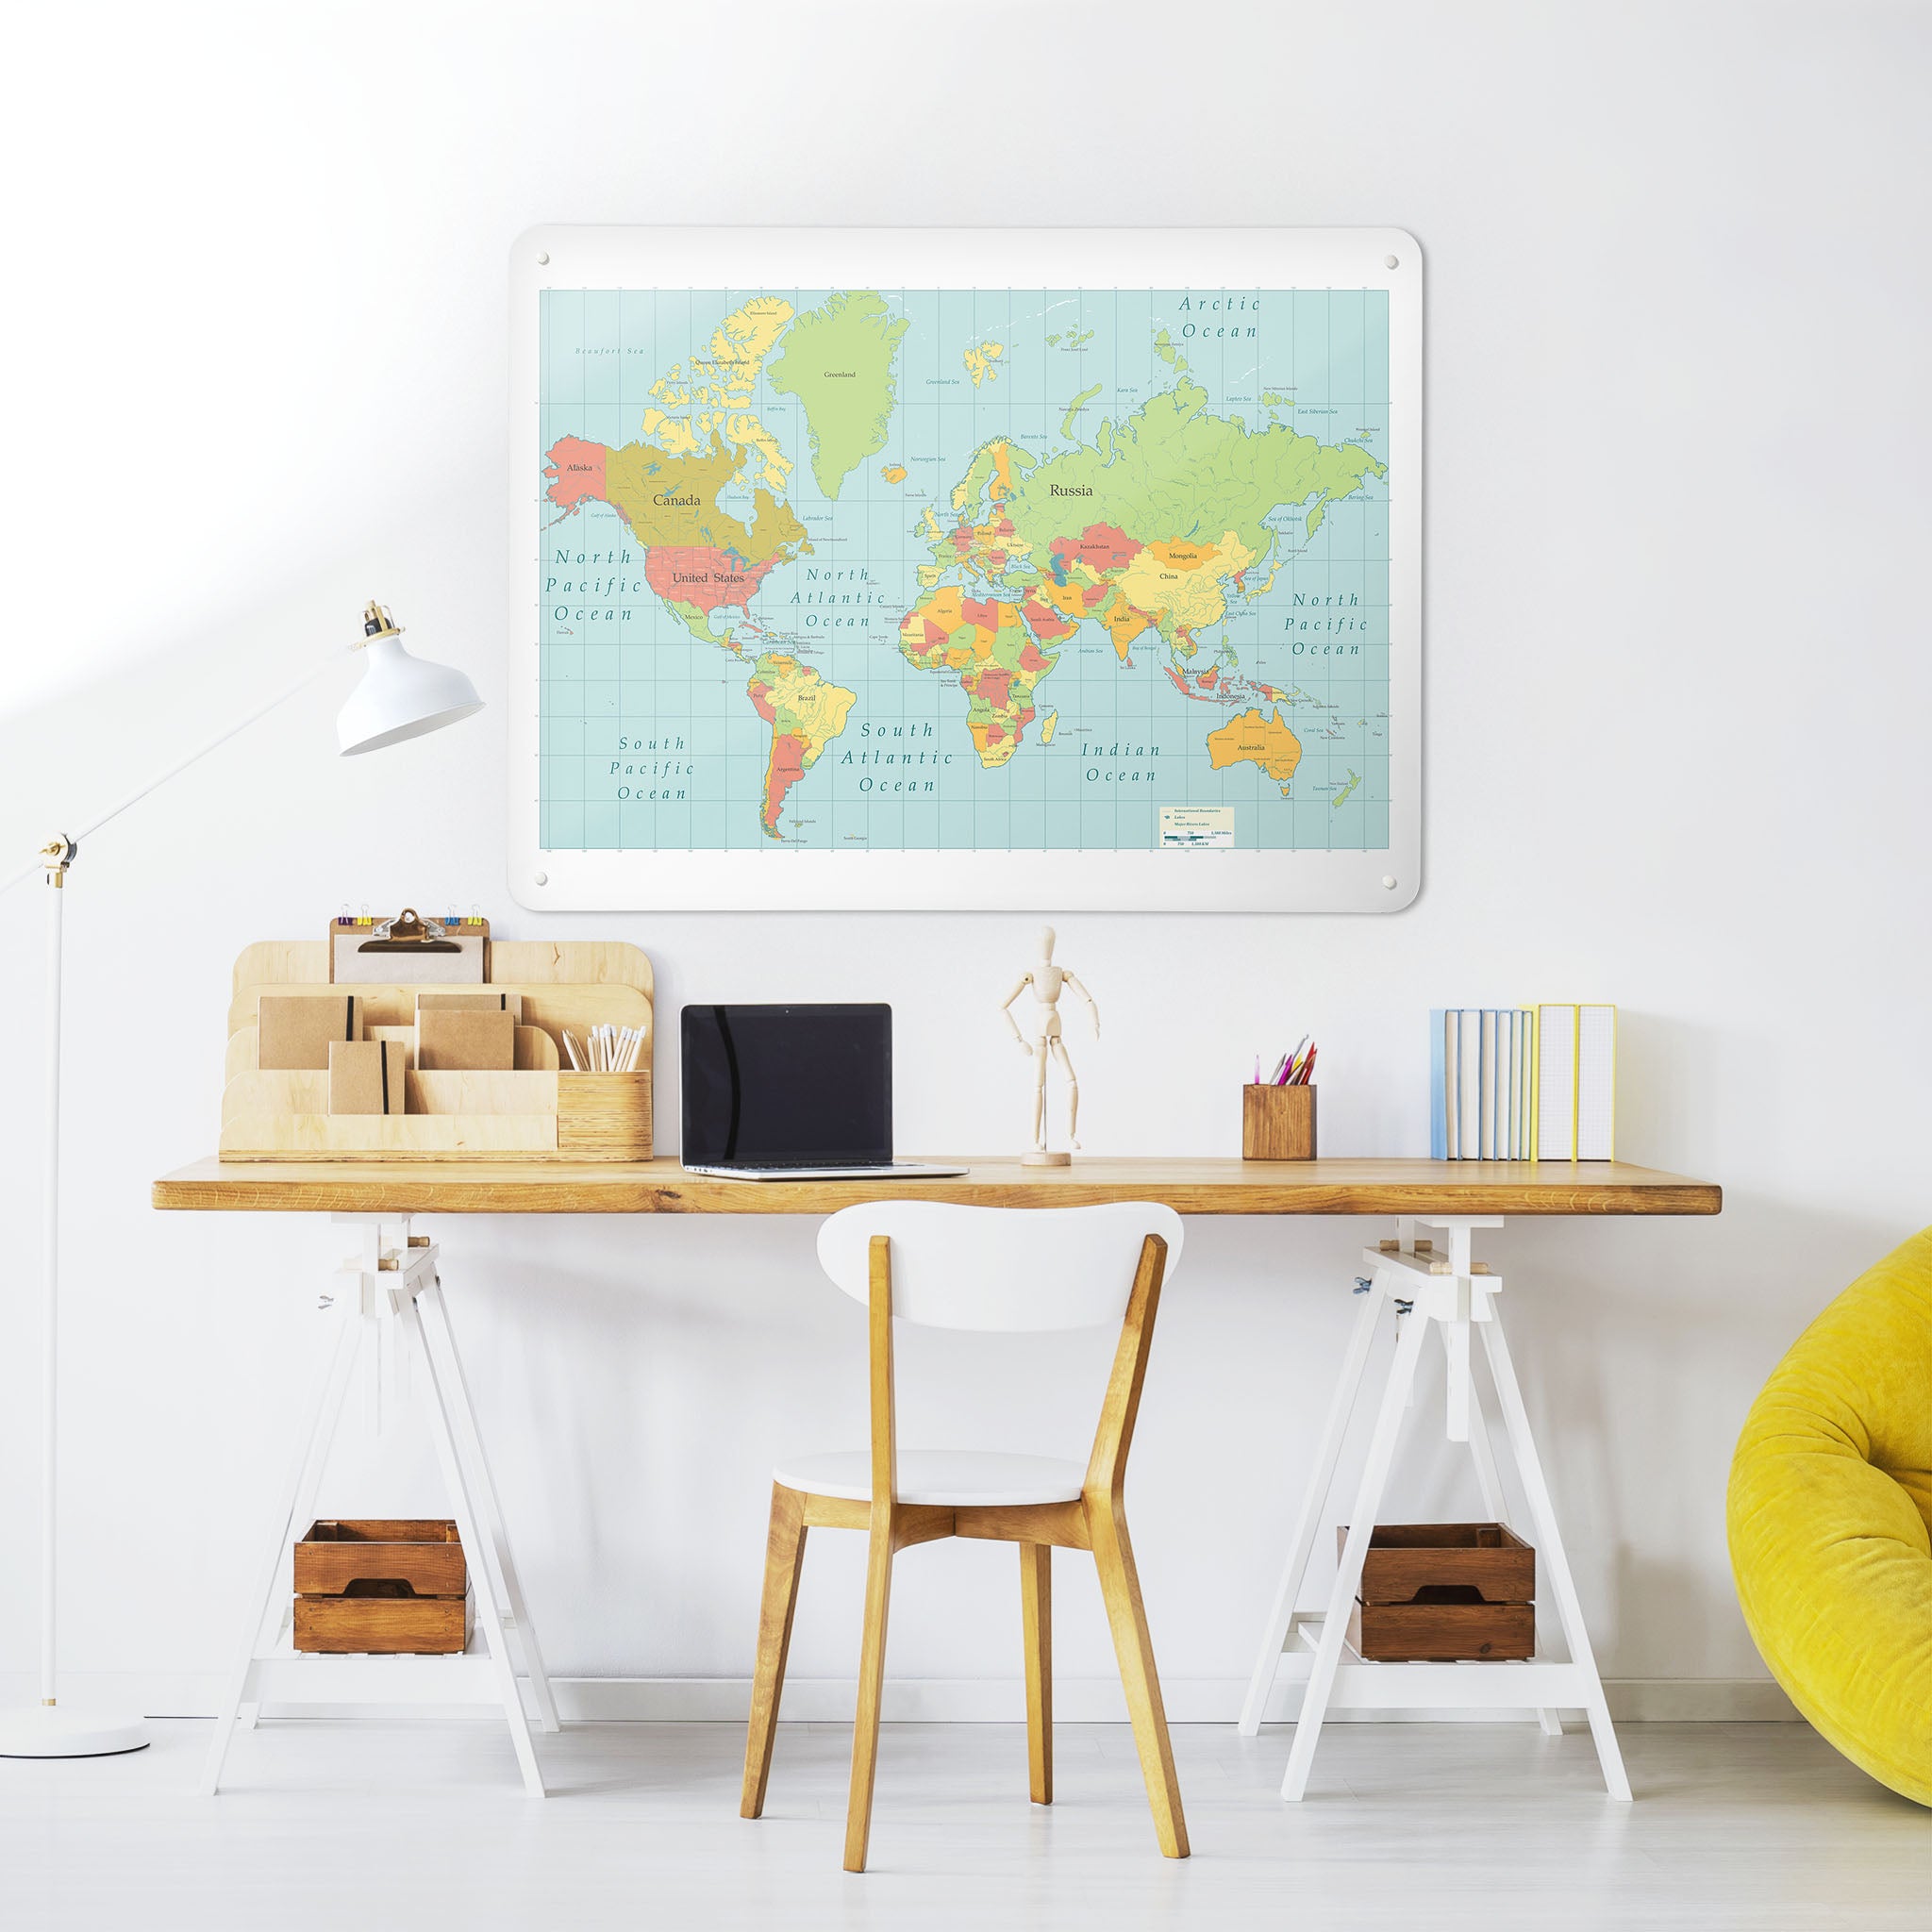 A desk in a workspace setting in a white interior with a magnetic metal wall art panel showing a world map design